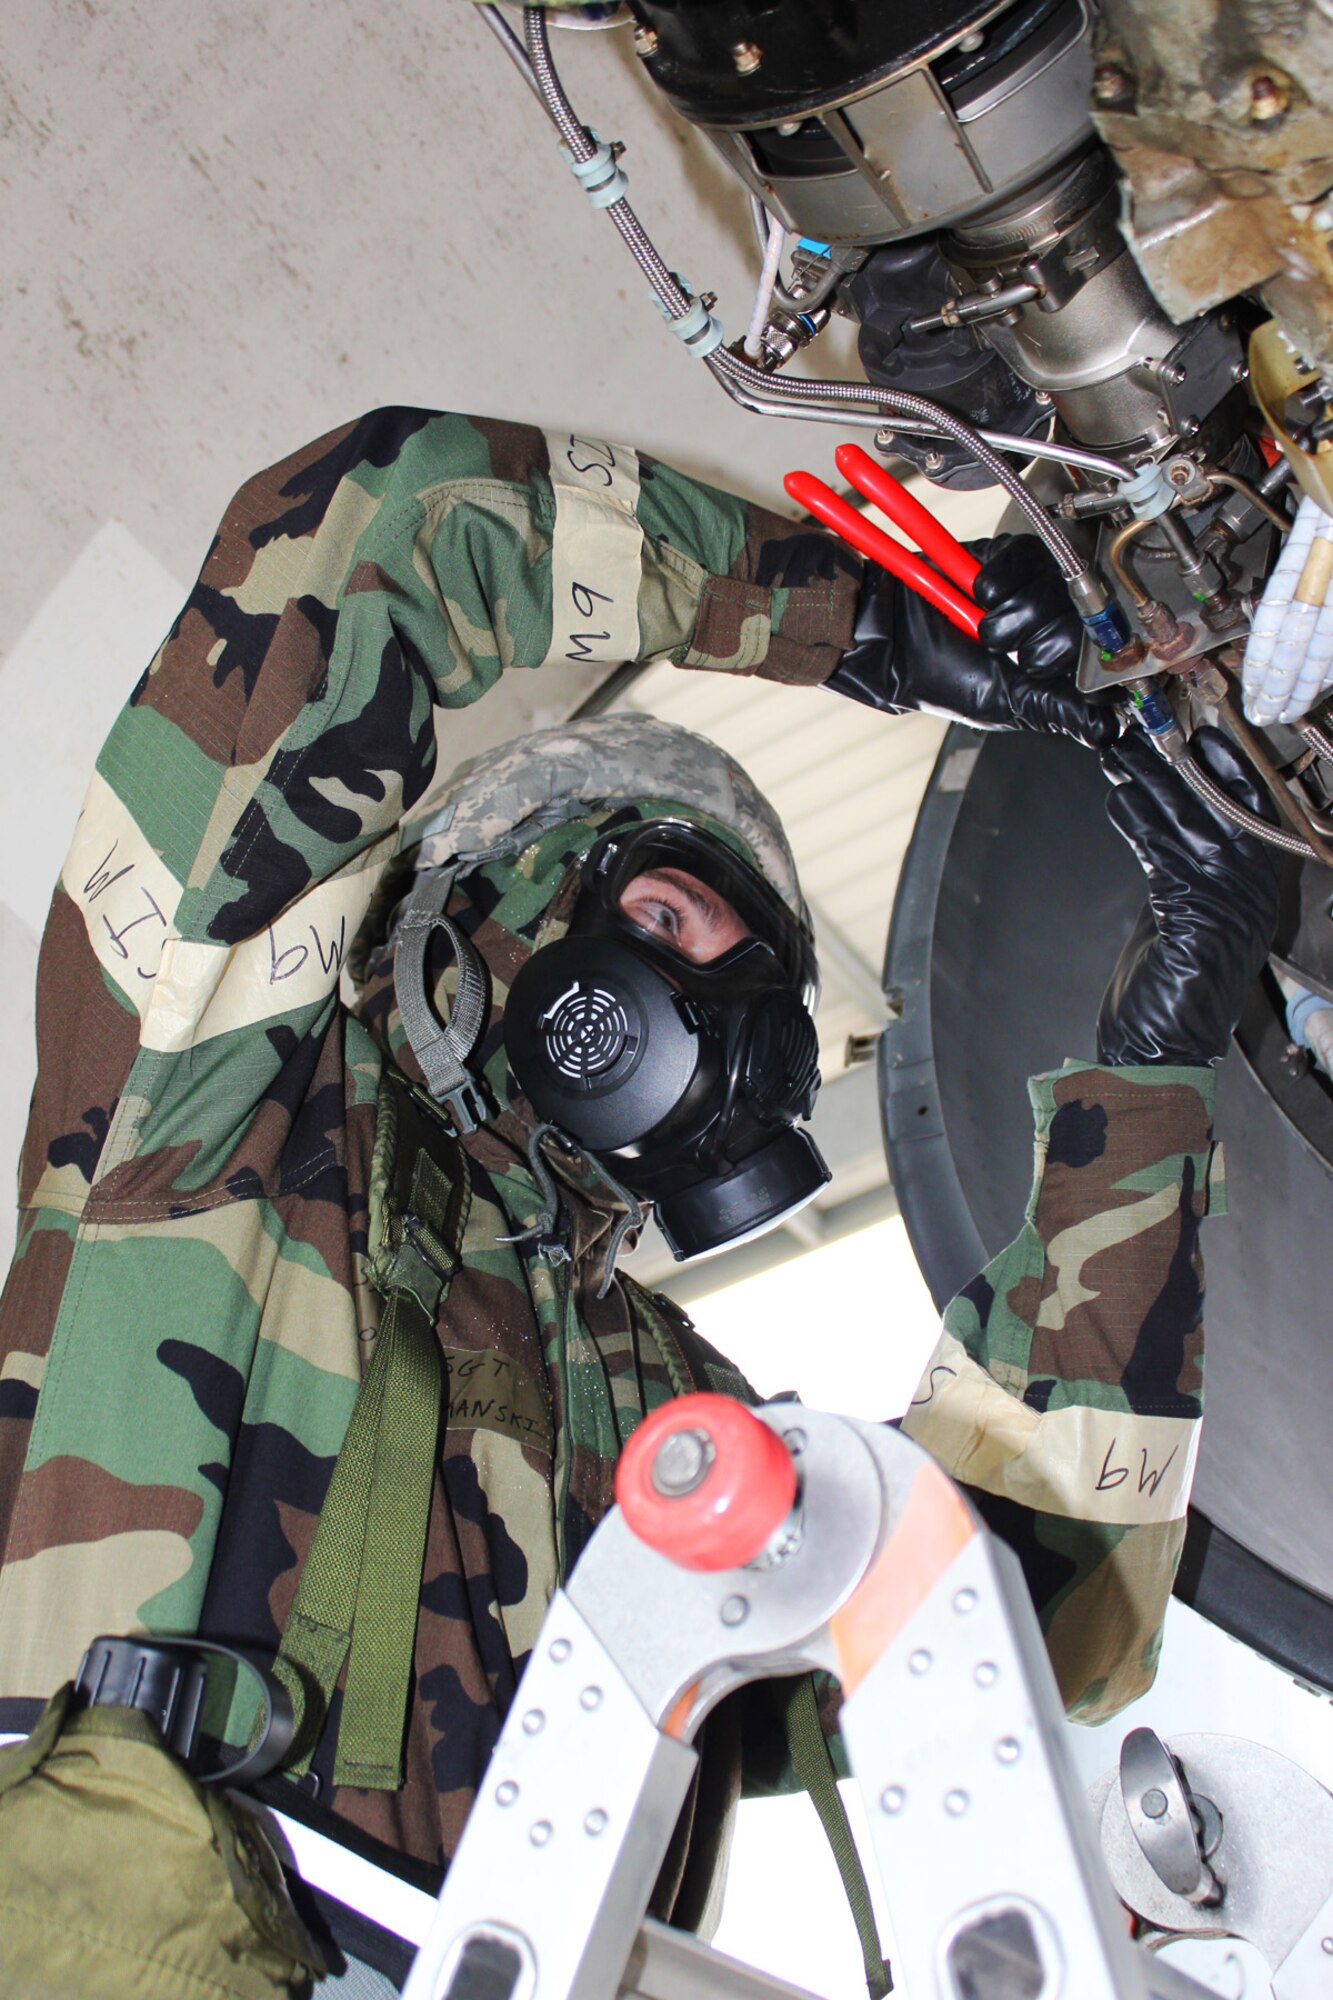 Staff Sgt. Jason Klemanski, 127th Maintenance Support Squadron, works on an A-10 Thunderbolt II engine while he wears chemical protective gear, Oct. 13, 2012, at Selfridge Air National Guard Base, Mich. The squadron spent most of a day wearing the gear while performing their duties around the aircraft. (Air National Guard photo by TSgt. Dan Heaton)